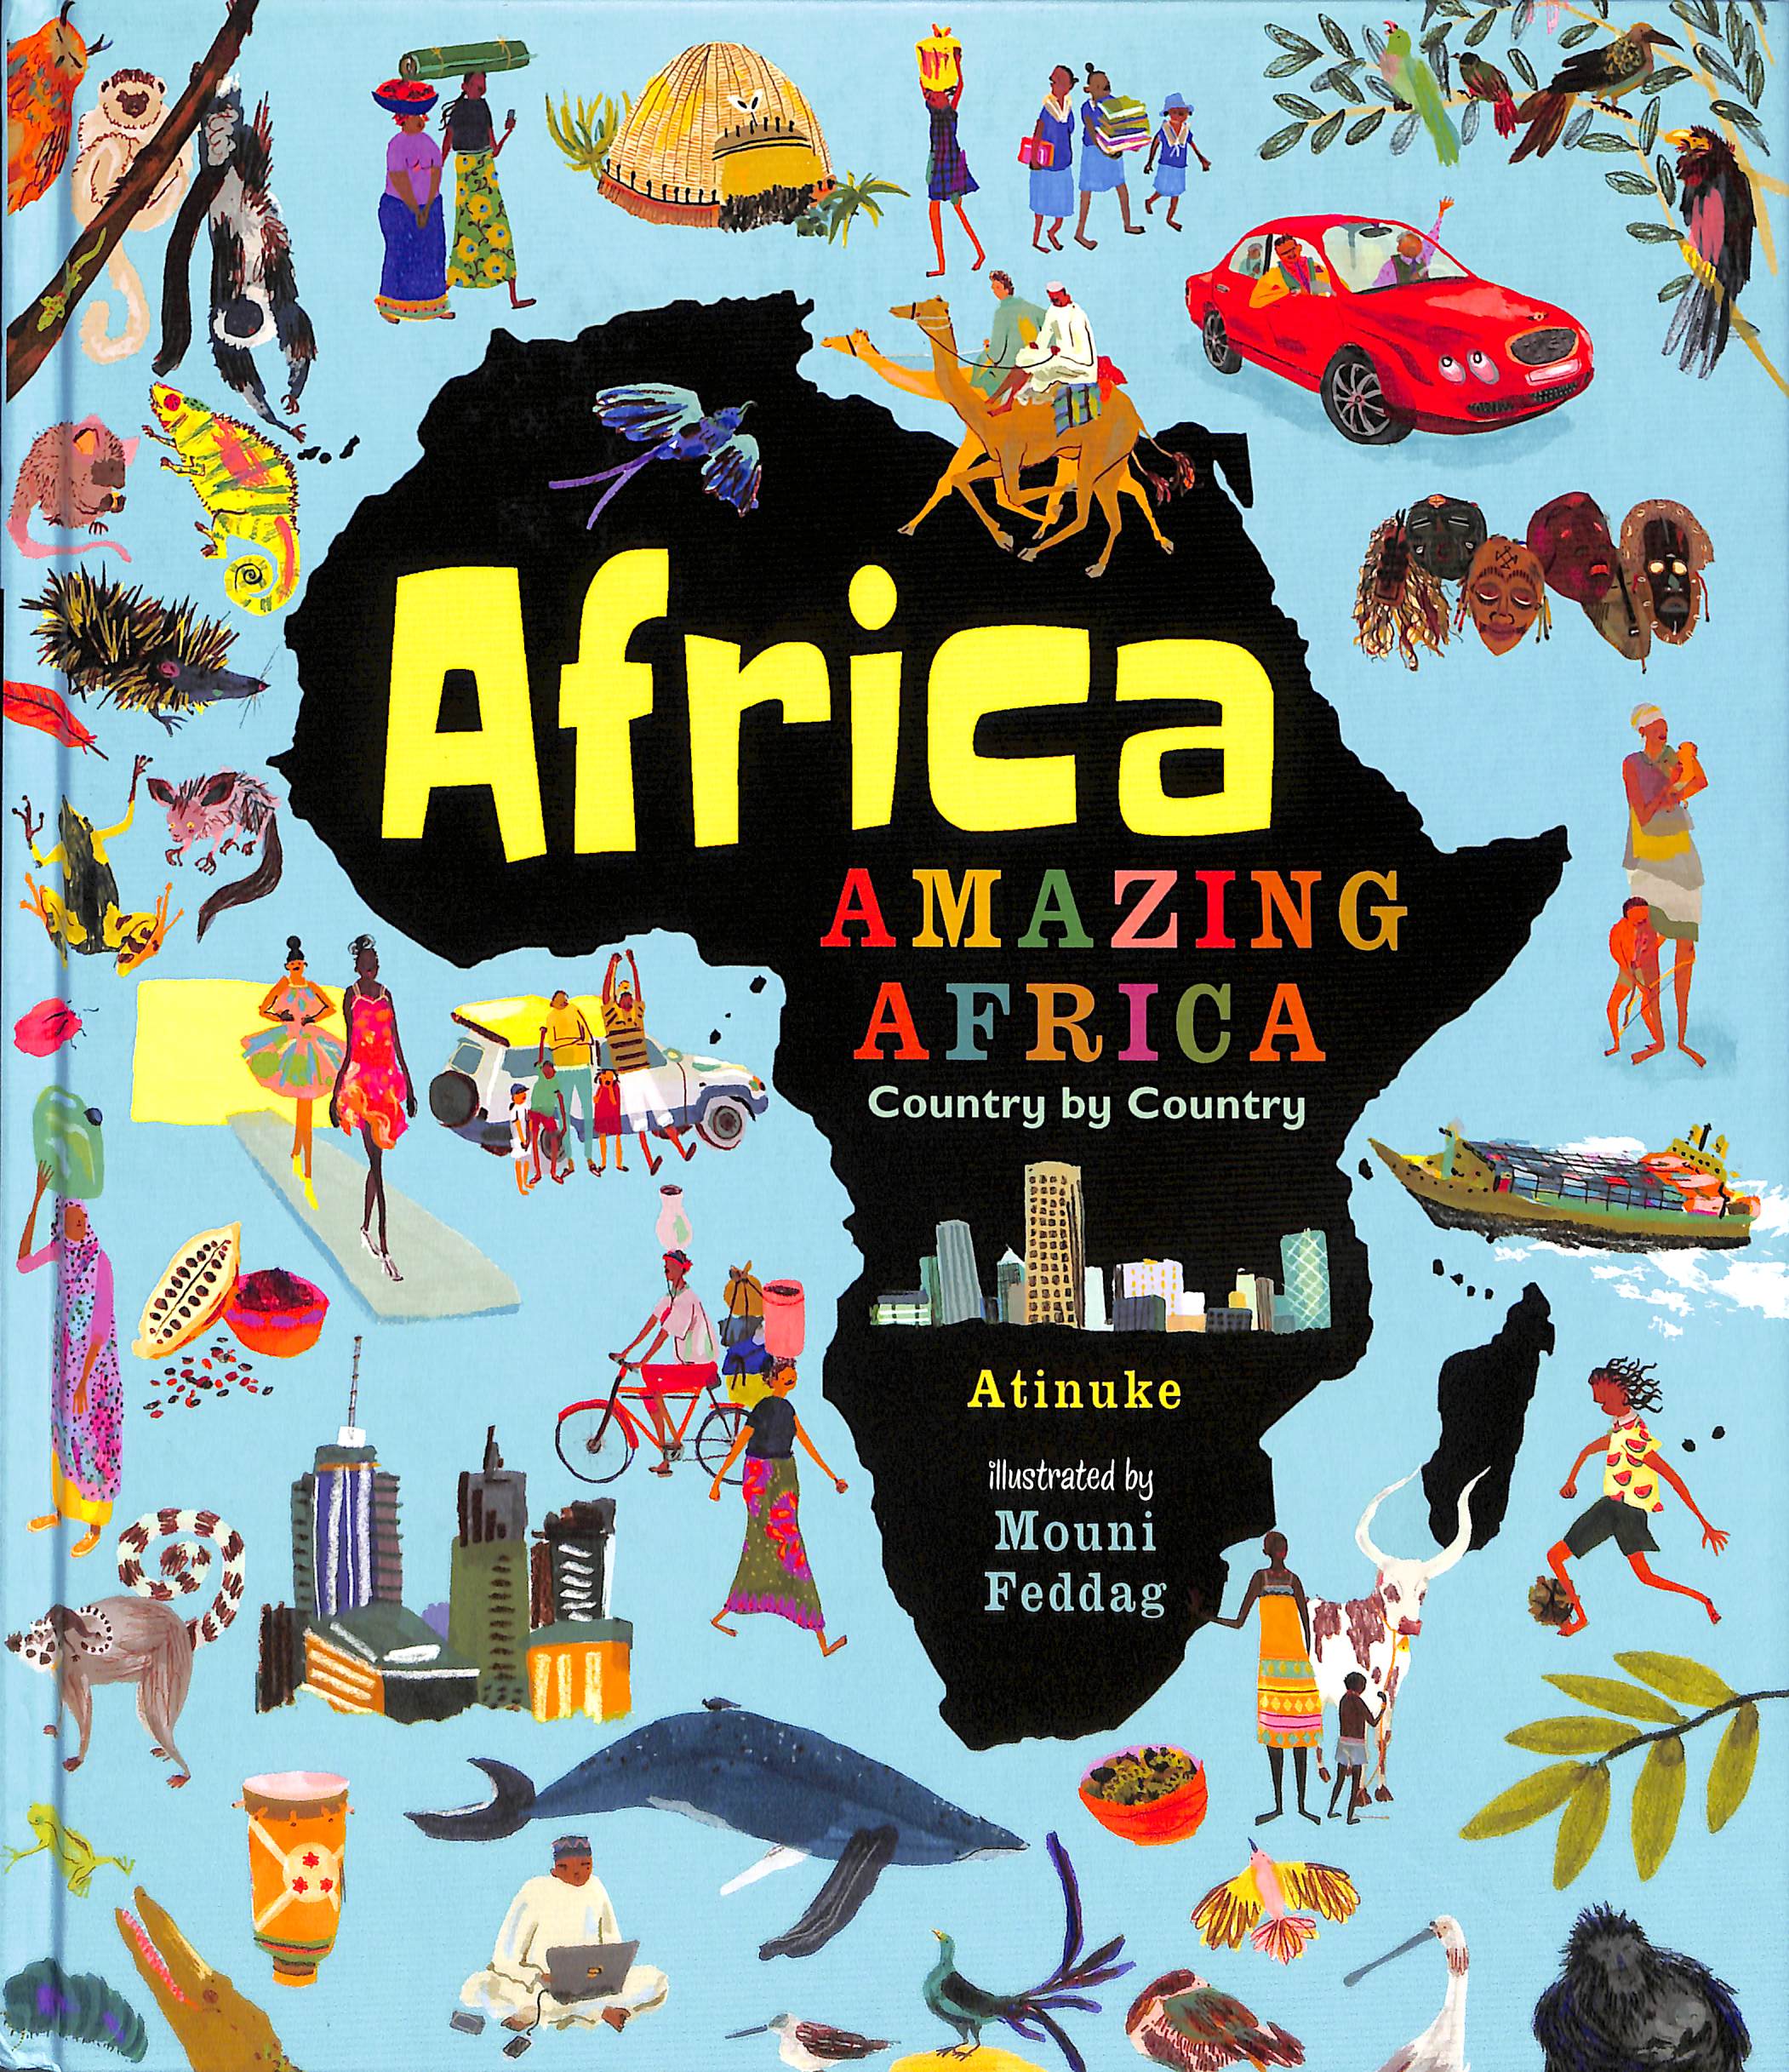 Cover for Africa, Amazing Africa: Country by Country featuring an illustrated collage with a large black silhouette of the African continent in the center on a light blue background surrounded by a large number of illustrated items and scenes from a whale to fashion models walking a catwalk to cars and animals. The title is displayed inside the country's silhouette in bright yellow and the subtitle is displayed in rainbow with each letter featuring a different color.